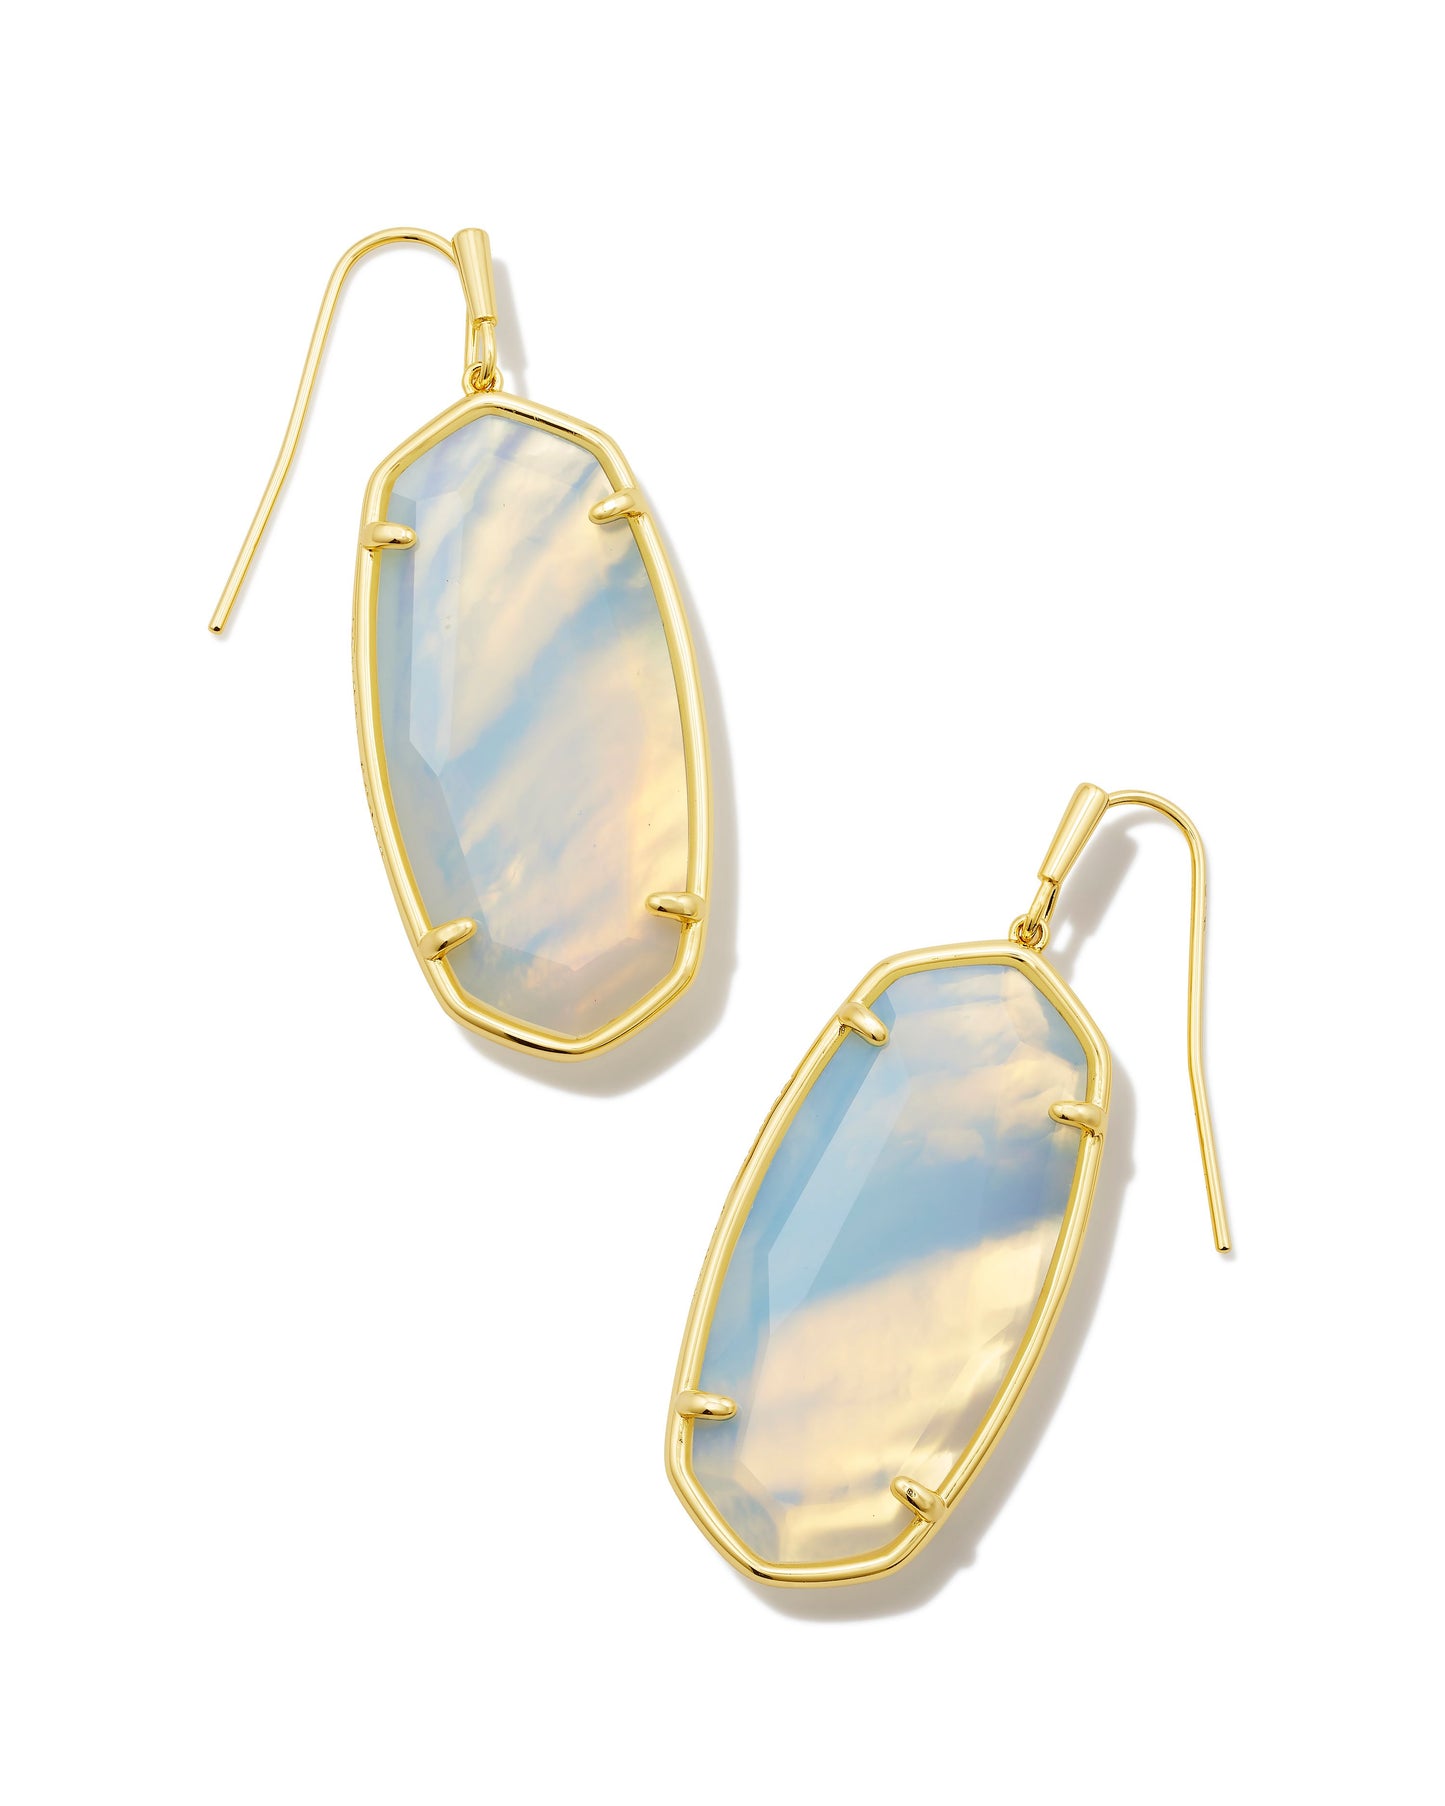 Faceted Elle Drop Earrings | Gold & Iridescent Opalite Illusion